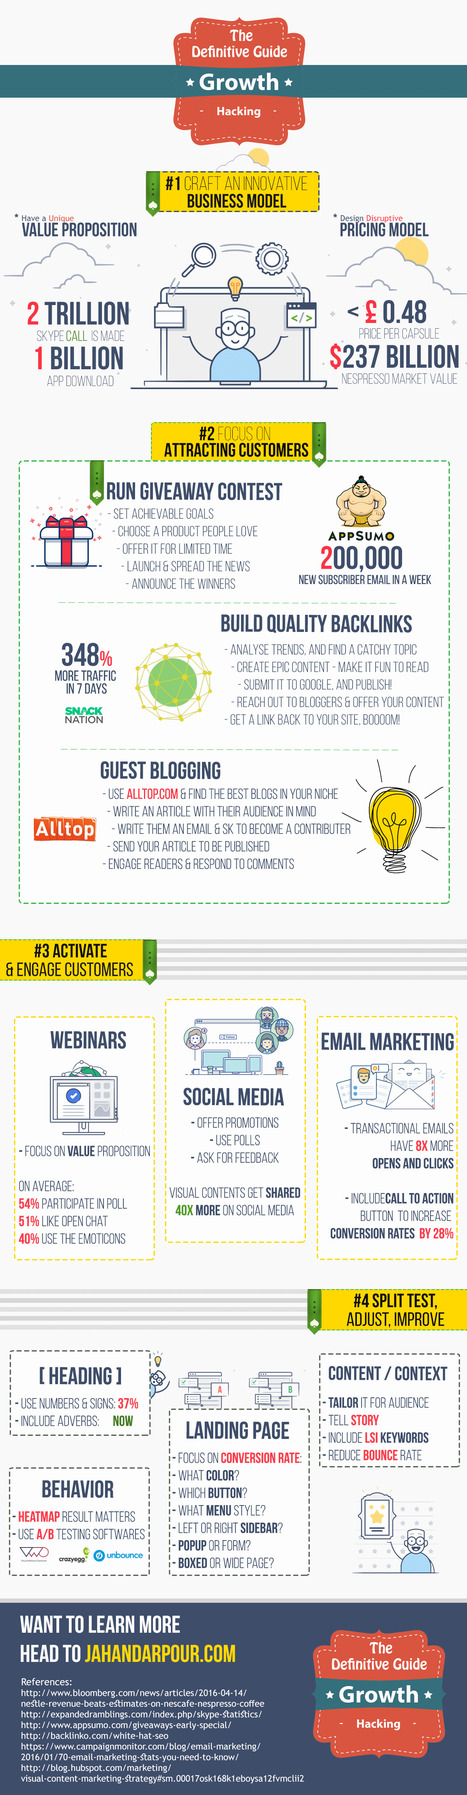 The Advanced Guide for Growth Hacking (Infographic) - Digital Information World | digital marketing strategy | Scoop.it